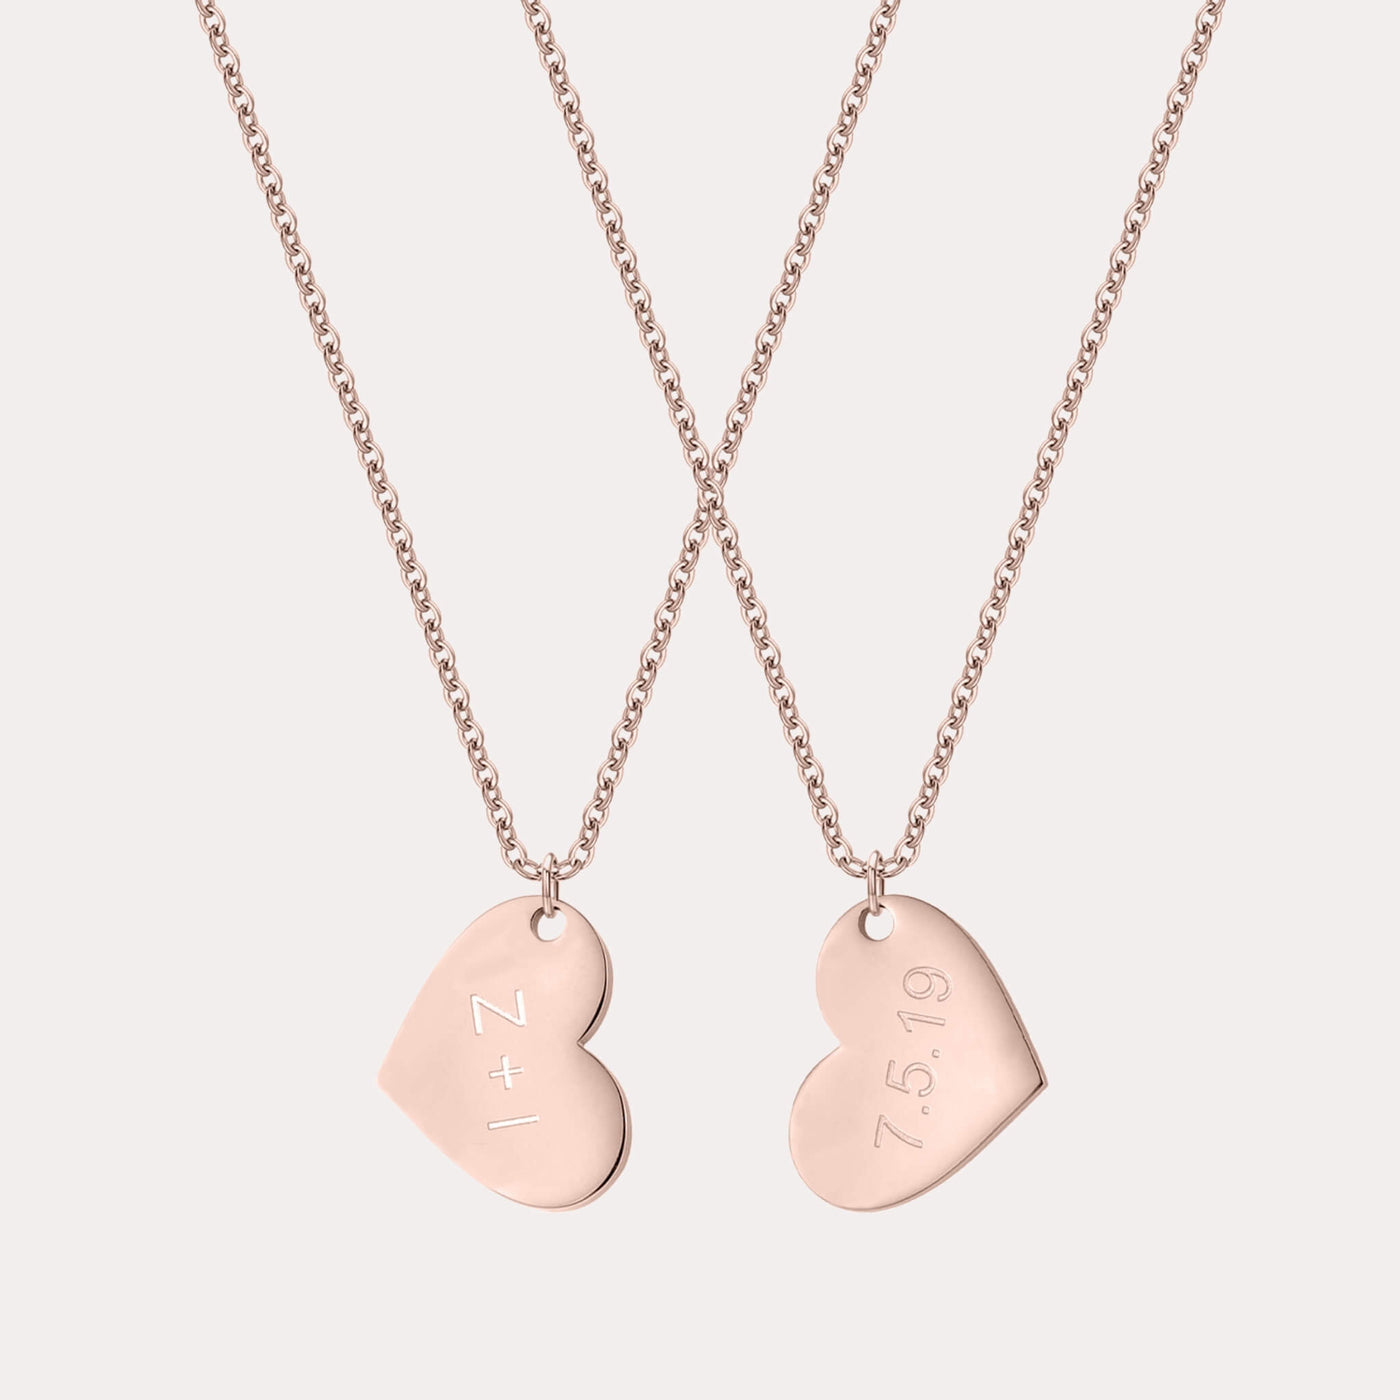 Custom Engraved Heart Necklace - Double Sided